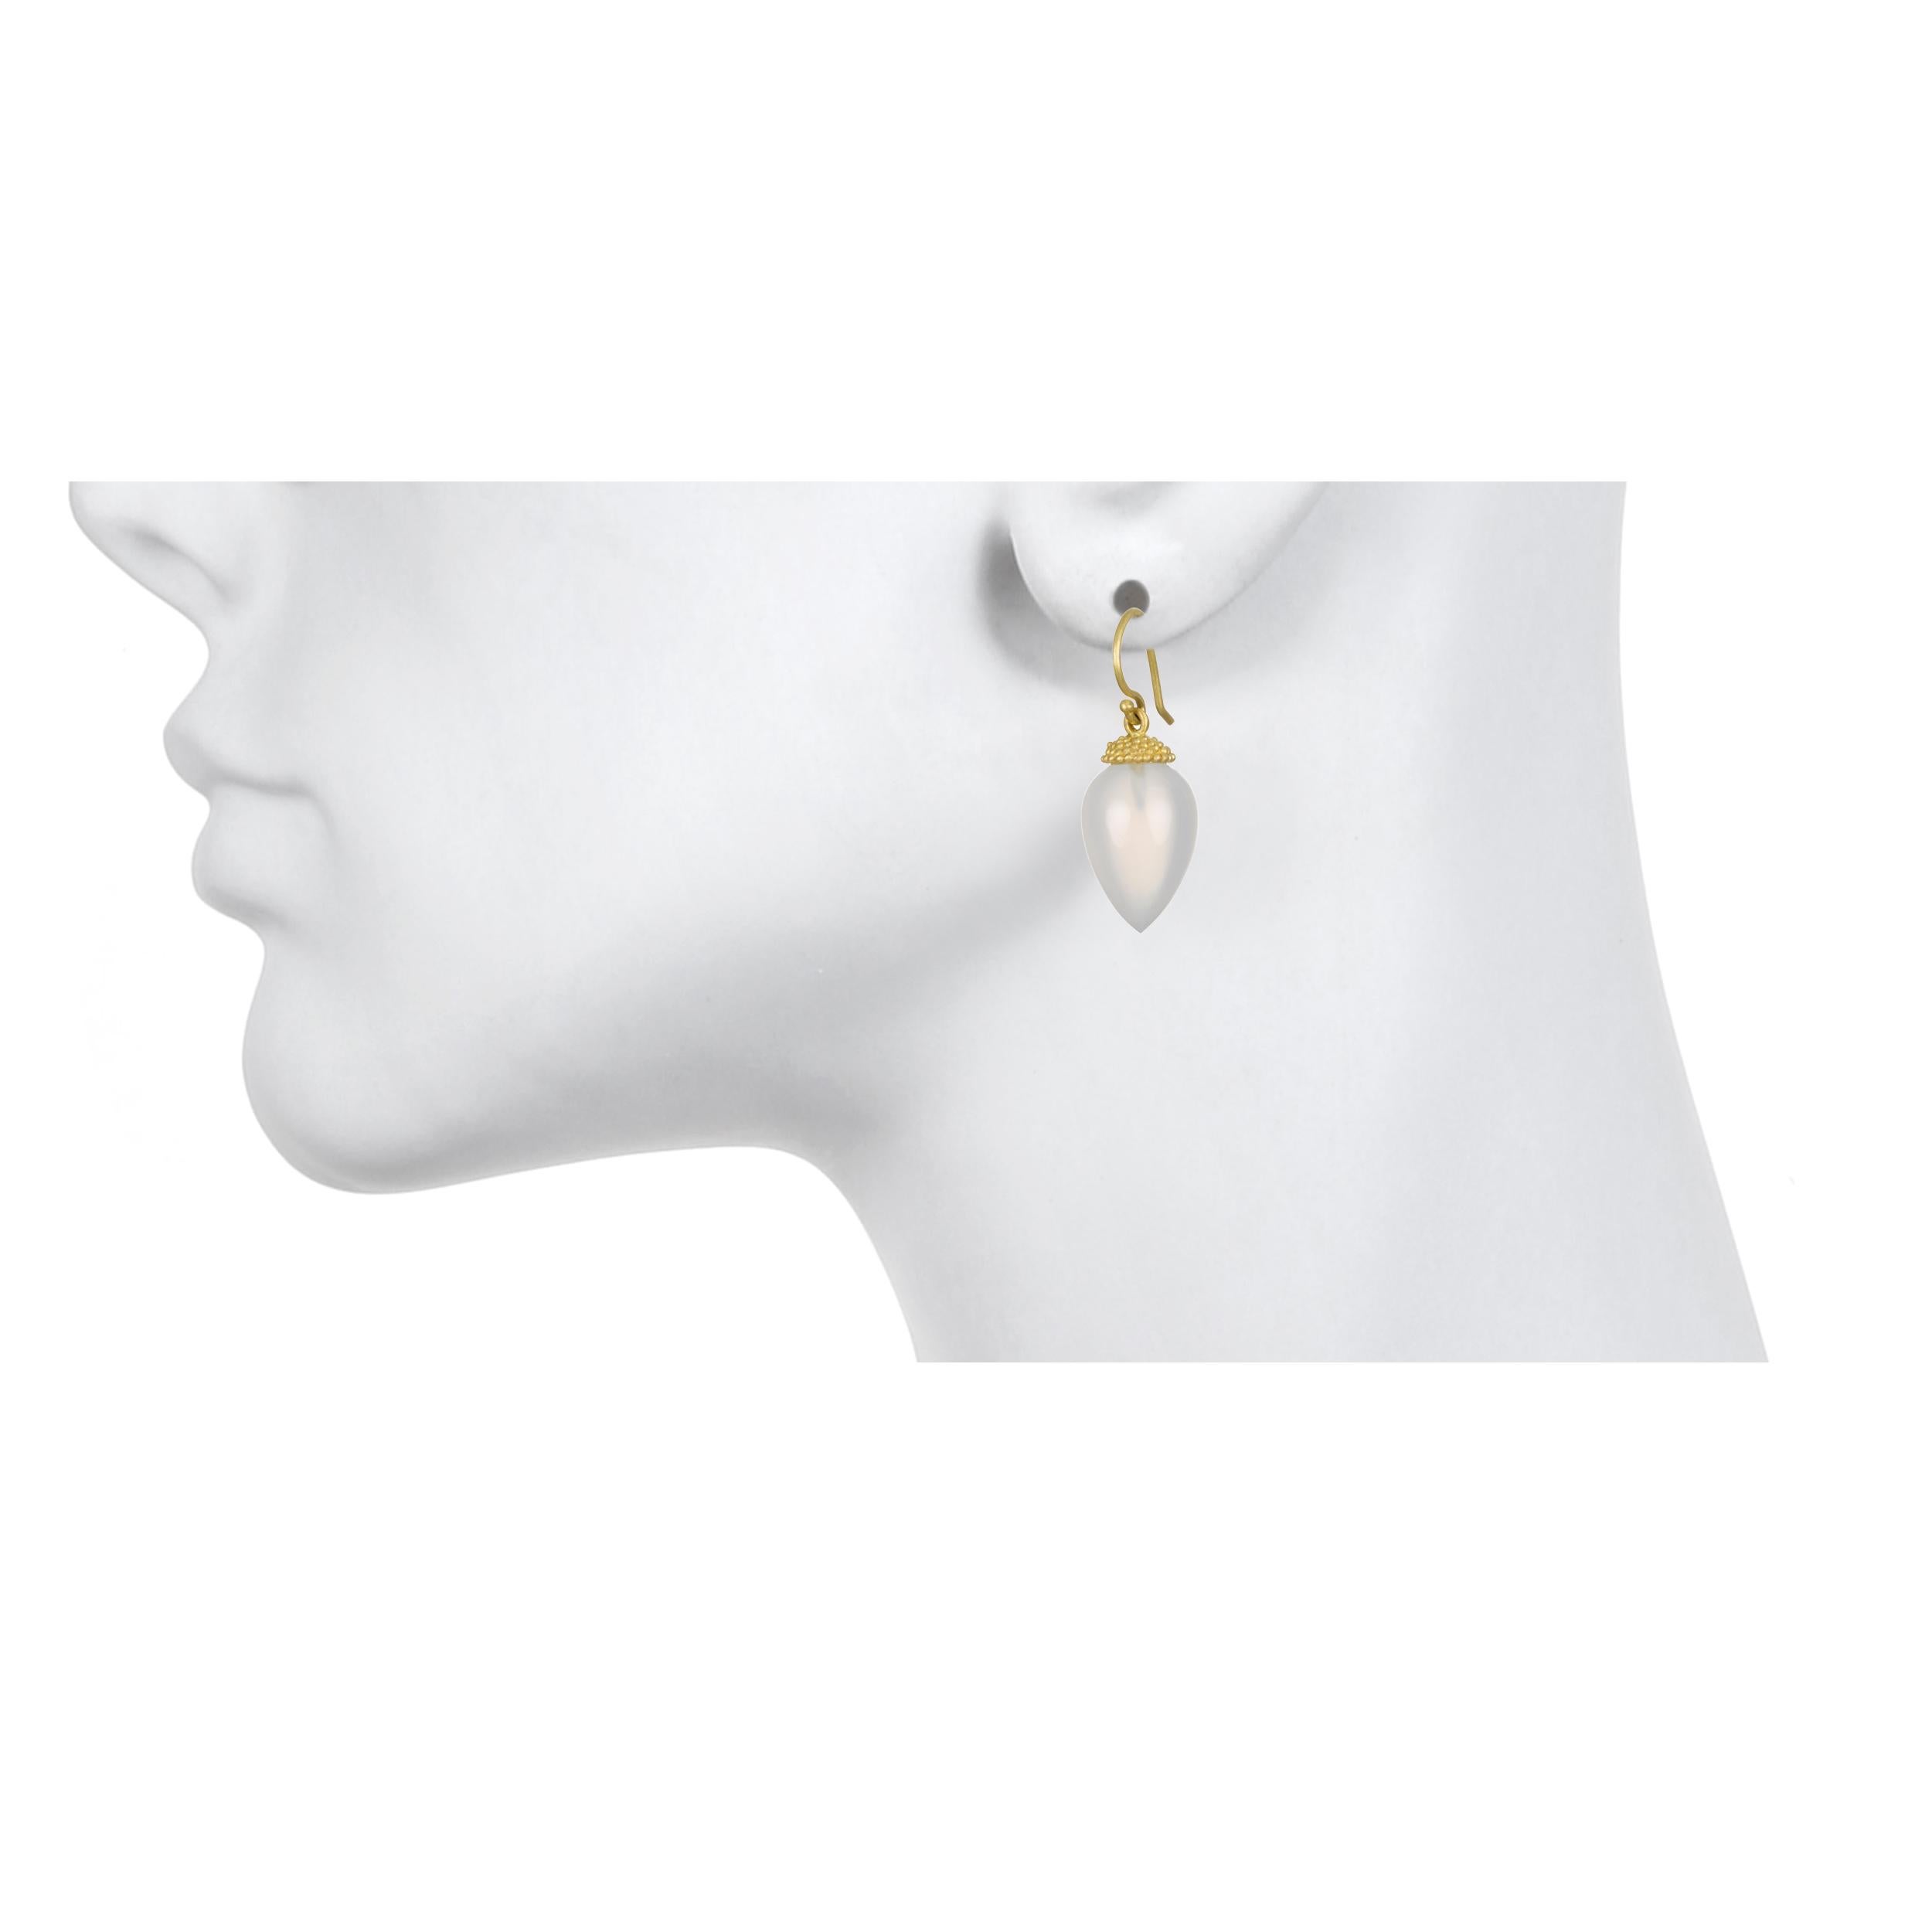 Beauty in simplicity.  These 18k gold Acorn drop earrings in smoky-white are easy to wear, flattering and go with just about everything. The earrings are finished with an 18k gold granulation cap and french ear wires.  3/4 inch long.

All Faye Kim